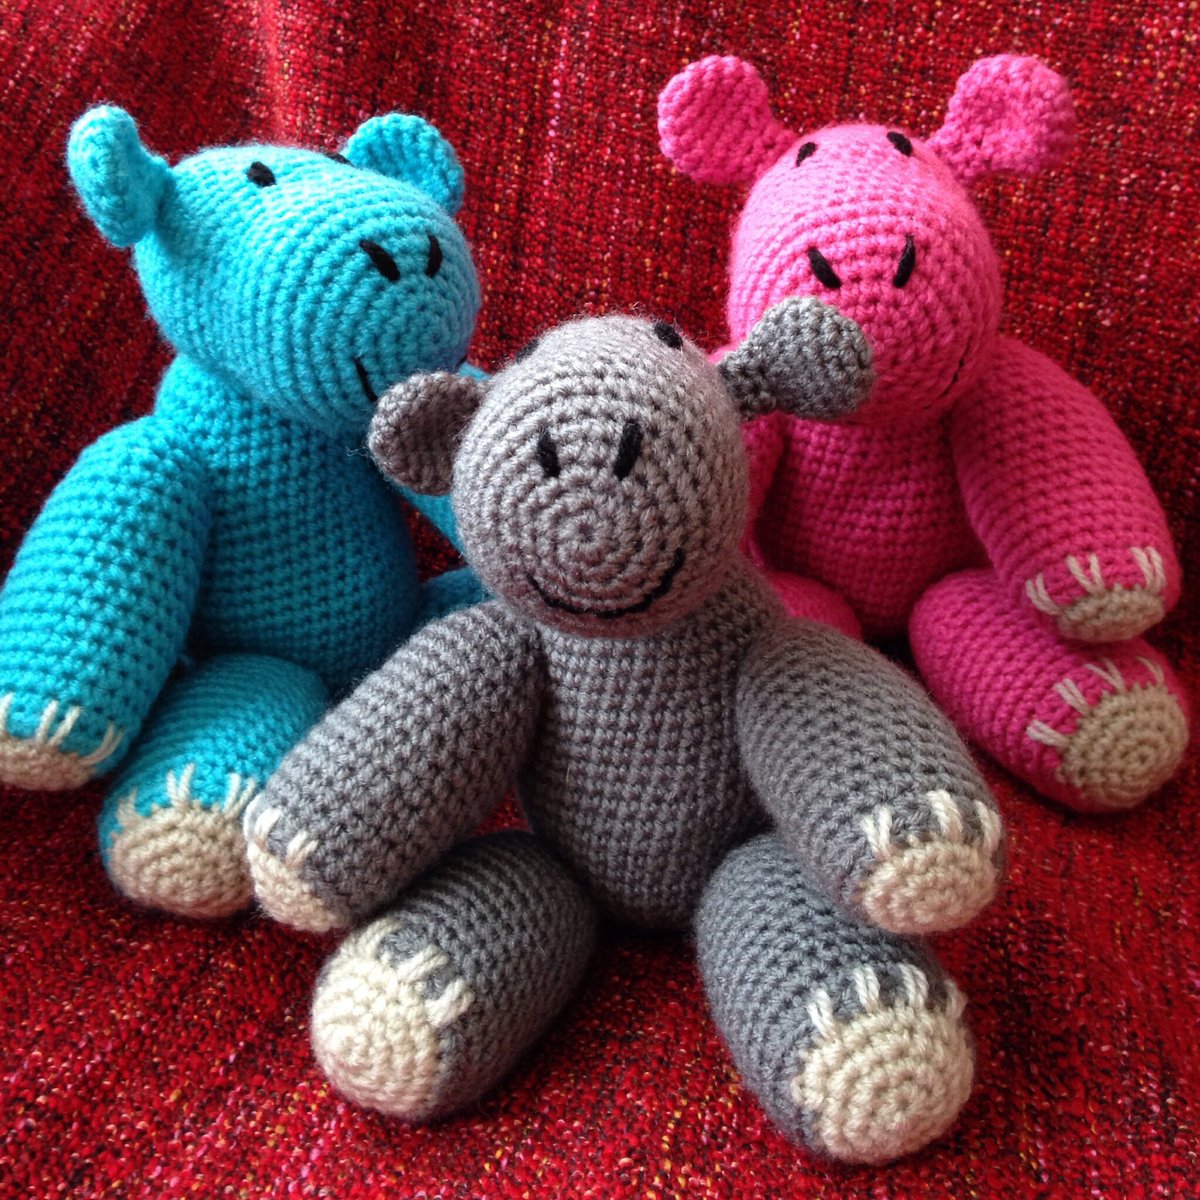 Looking for an alternative to the traditional teddy bear? These sweet hippos make super cuddle companions 😊 bitzas.etsy.com/listing/239756… #firsttmaster #MHHSBD #etsyhandmade